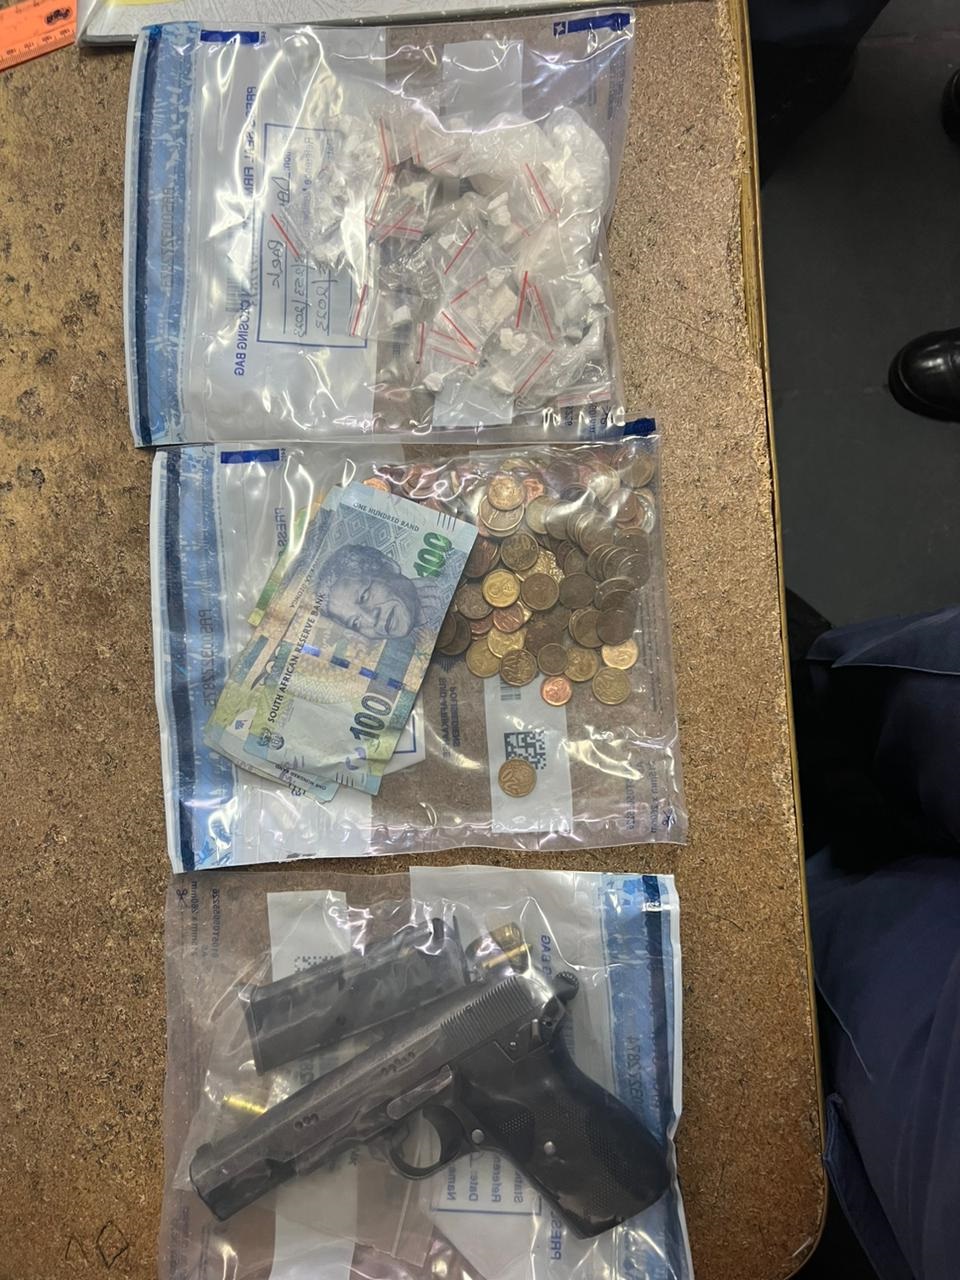 A man arrested for possession of an unlicensed firearm, ammunition and drugs.